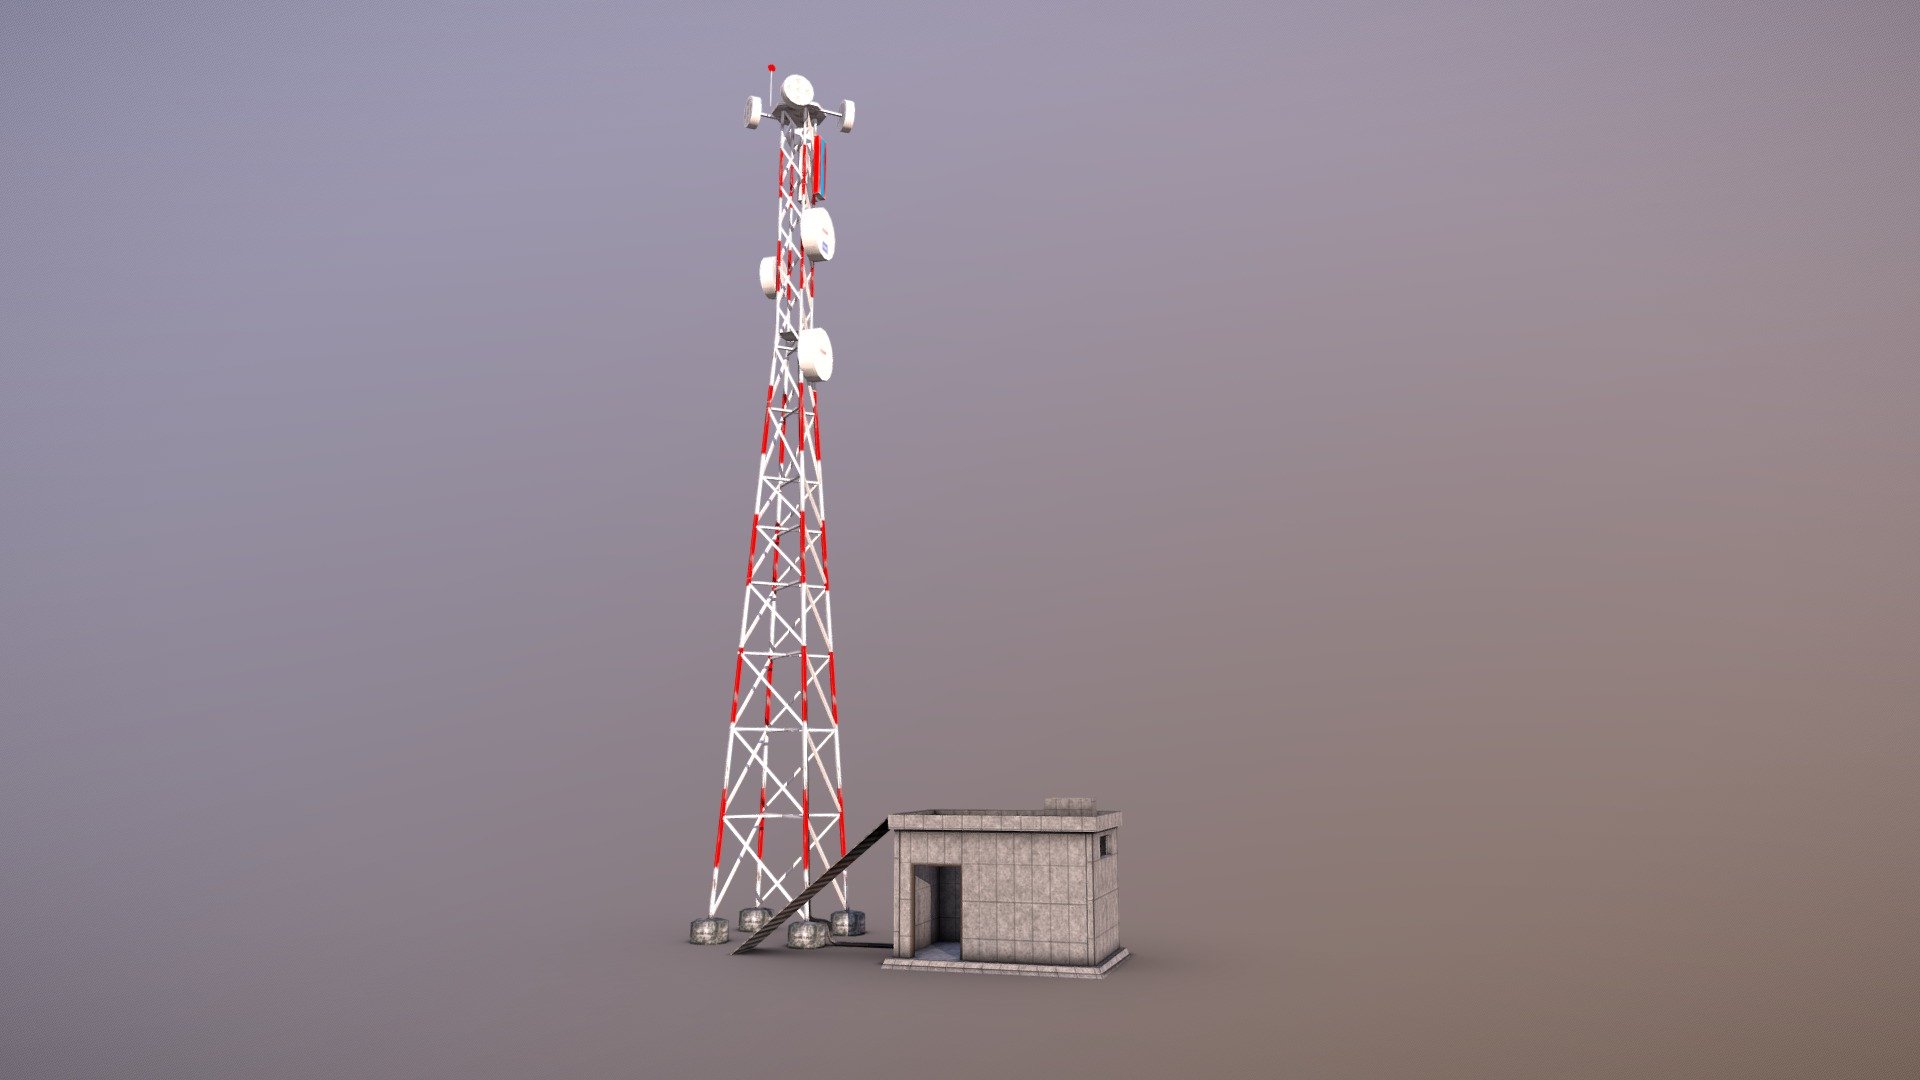 Cell tower 3D model for mobile games, AR &amp; 3D Scenes. It optimized for mobile games with texture atlas. Size is just 772KB,. If you need any changes in models or need custom 3D models, Please contact me at info@axwon.com - Cell Tower - Buy Royalty Free 3D model by Adarsh.Pawar 3d model